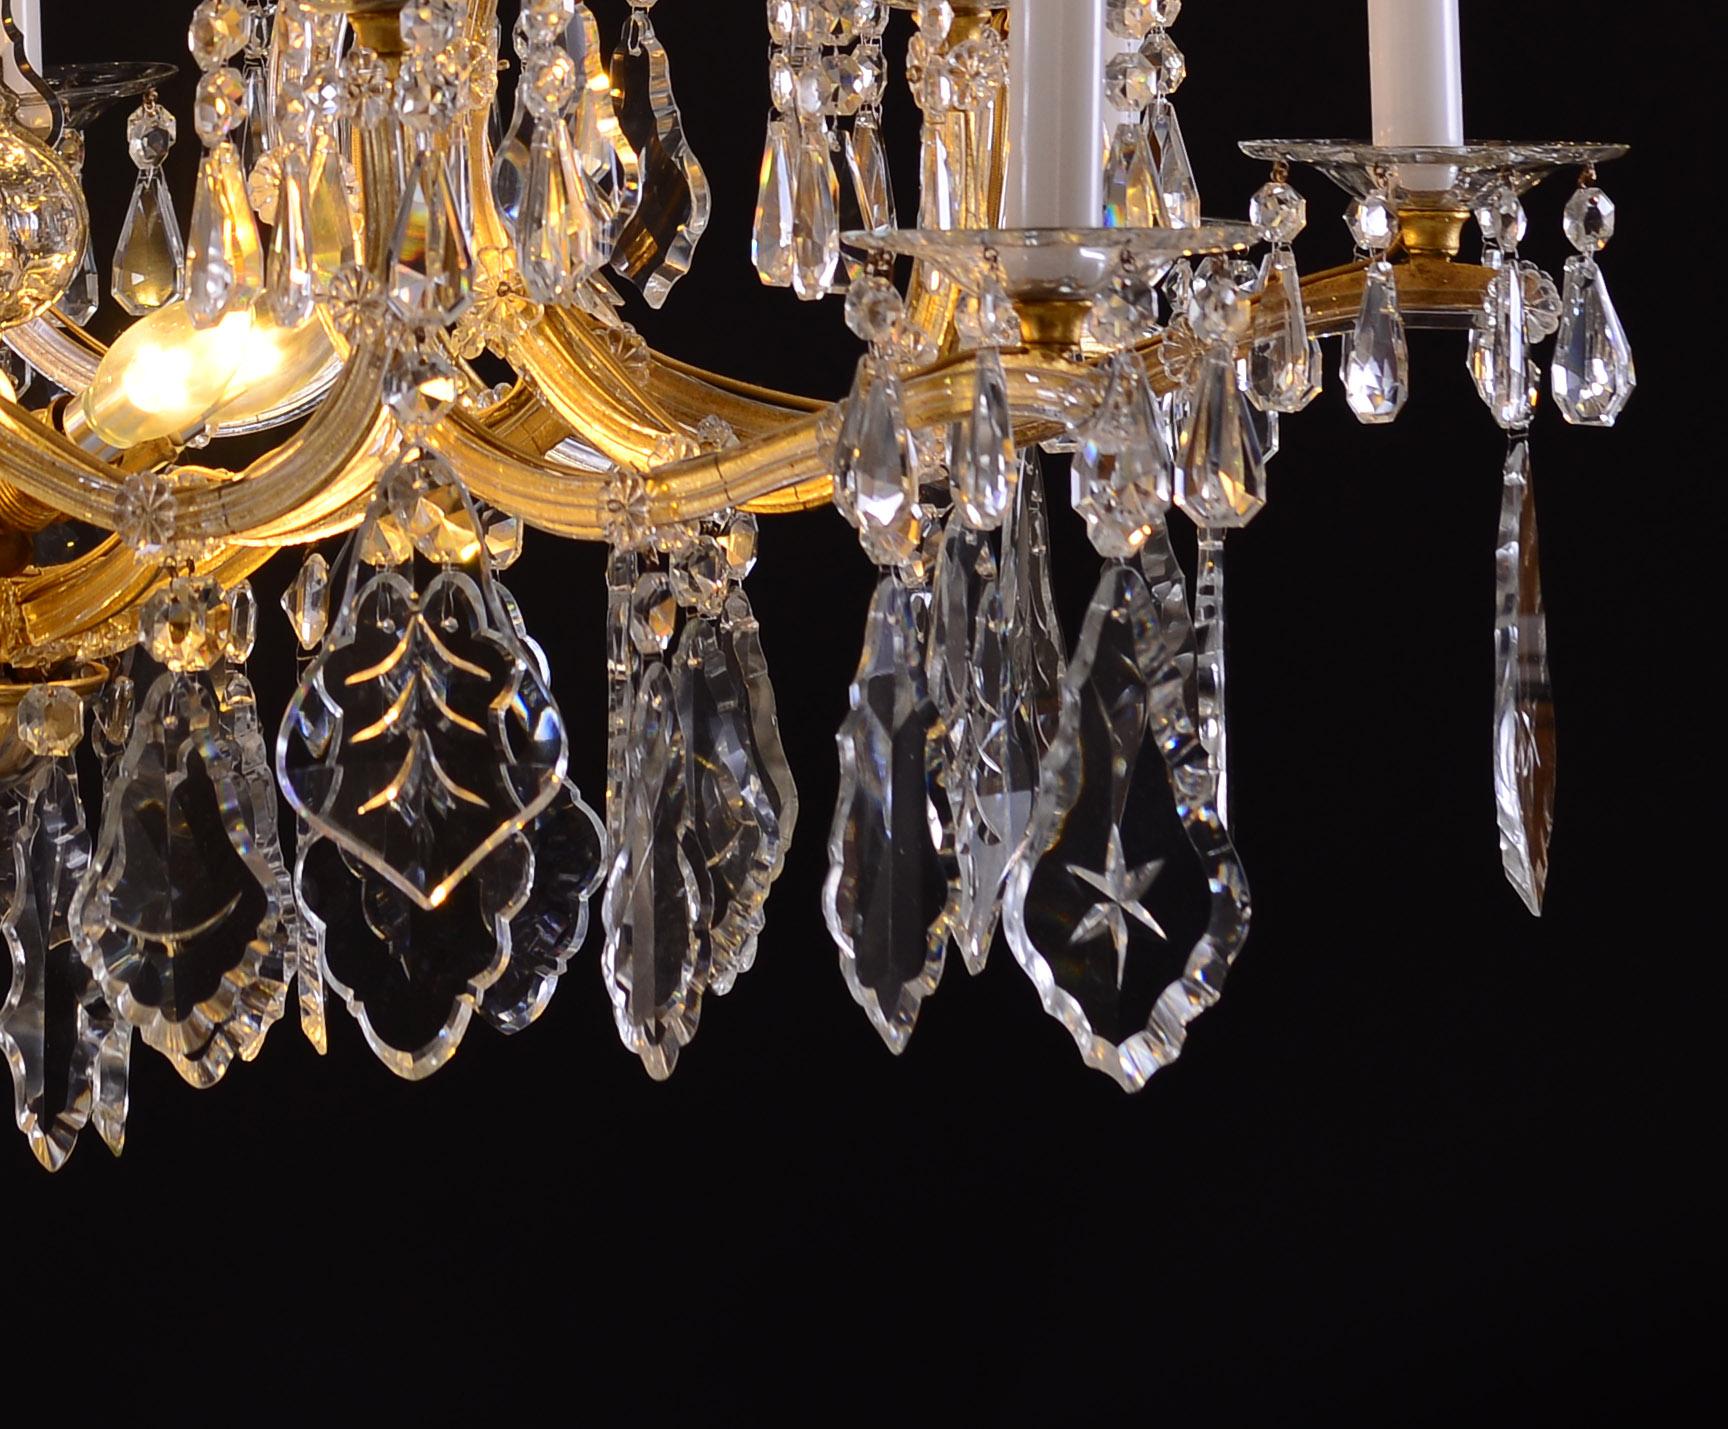 Early 20th Century Original Lobmeyr Maria Theresien Crystal Chandelier, Richly Decorated 28 Lights For Sale